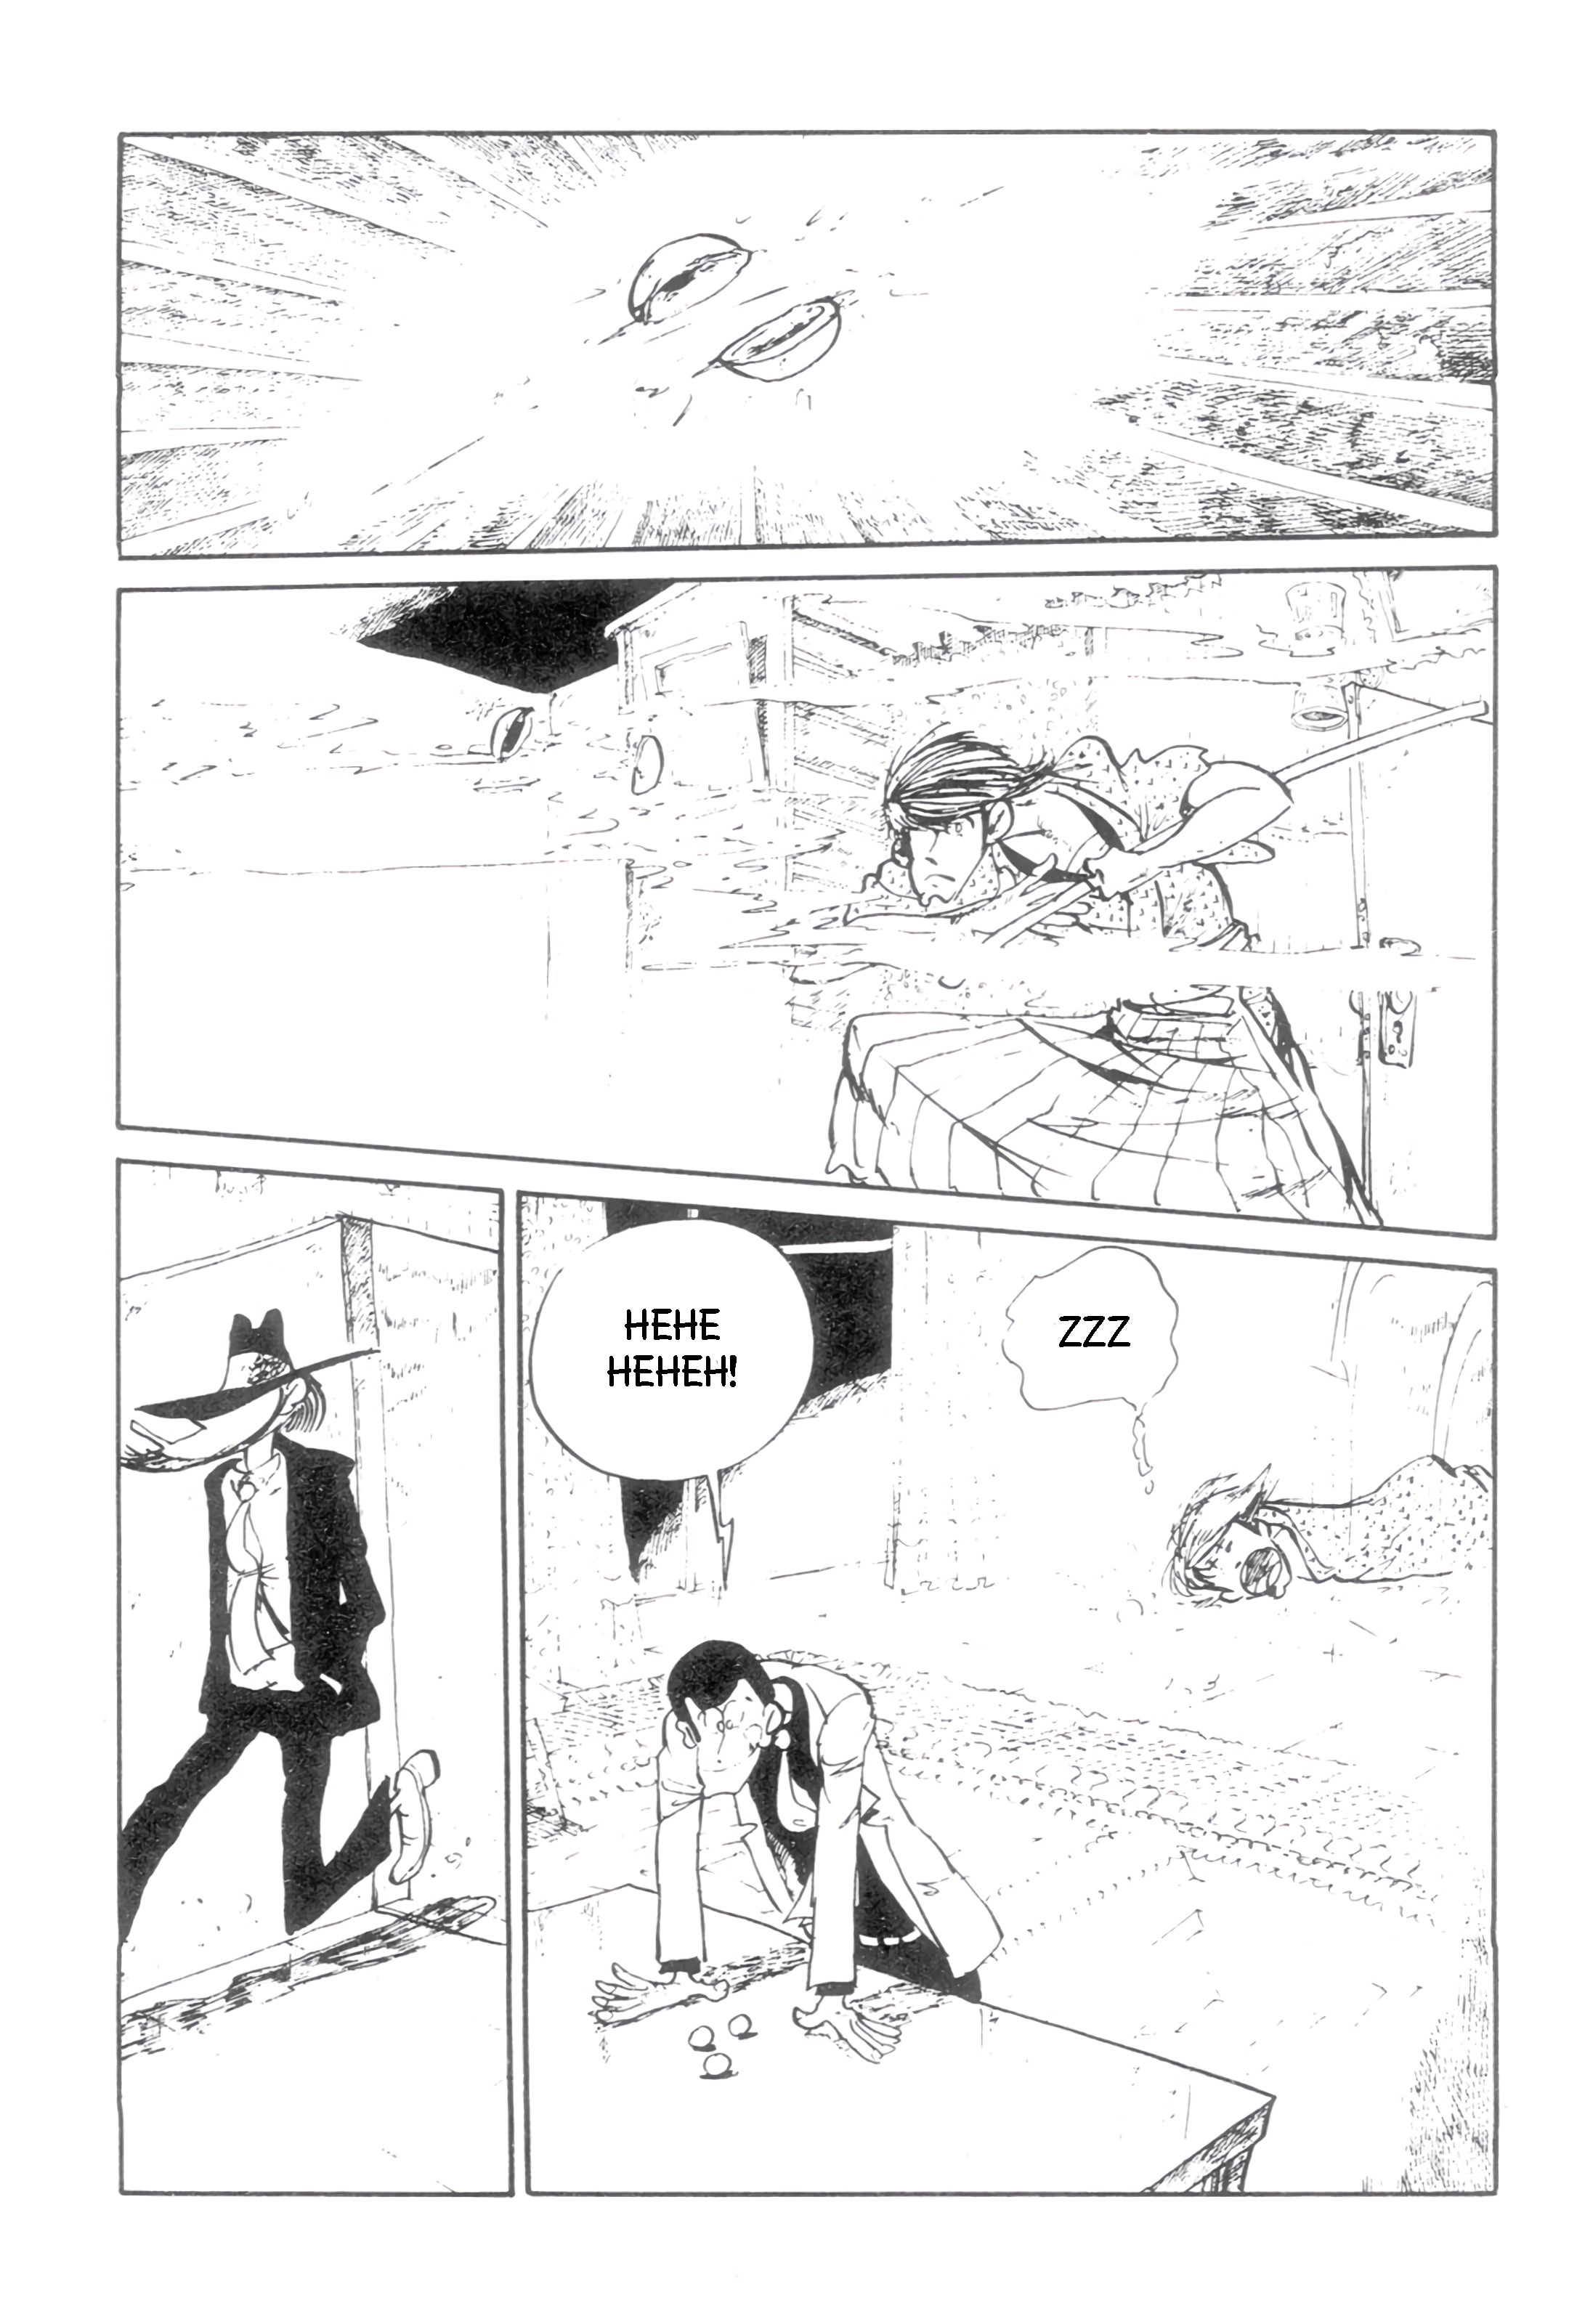 Lupin Iii: World’S Most Wanted Vol.10 Chapter 139: High-Profile Napping - Picture 3